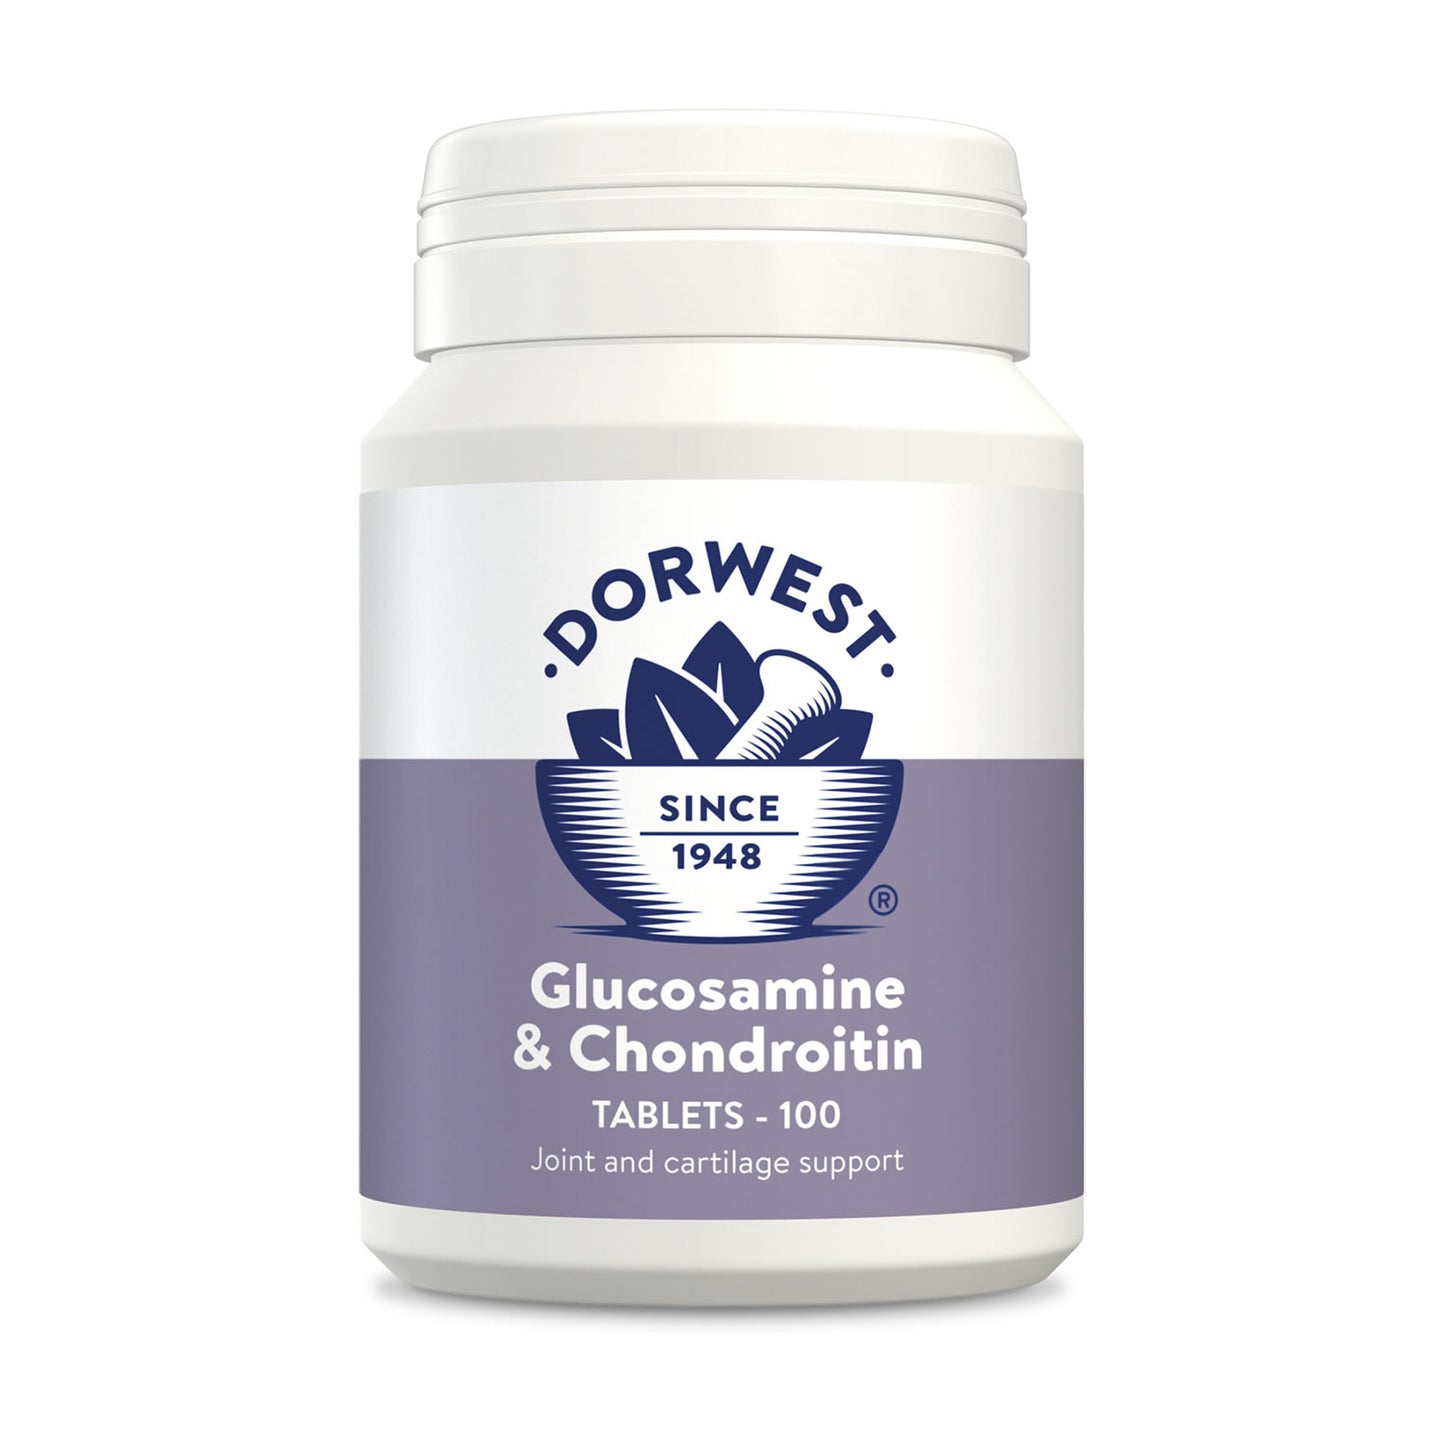 Dorwest Herbs Glucosamine & Chondroitin Tablets for Cats & Dogs